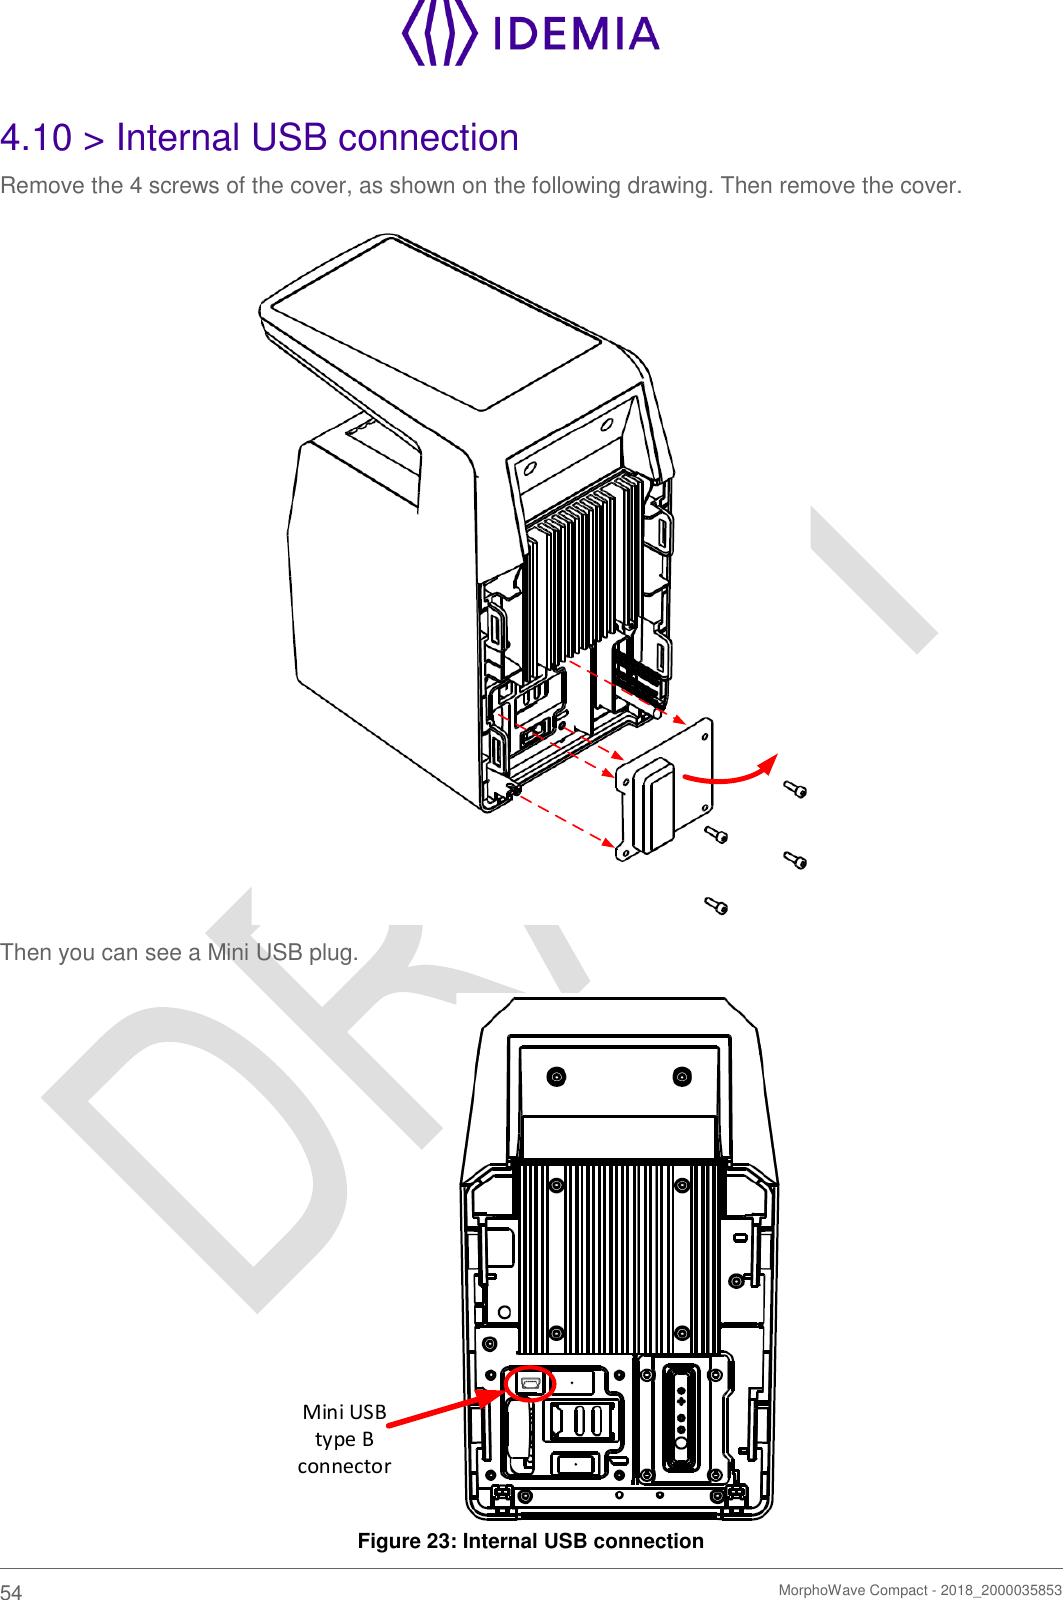    54   MorphoWave Compact - 2018_2000035853  4.10 &gt; Internal USB connection Remove the 4 screws of the cover, as shown on the following drawing. Then remove the cover.   Then you can see a Mini USB plug. Mini USB type B connector Figure 23: Internal USB connection 